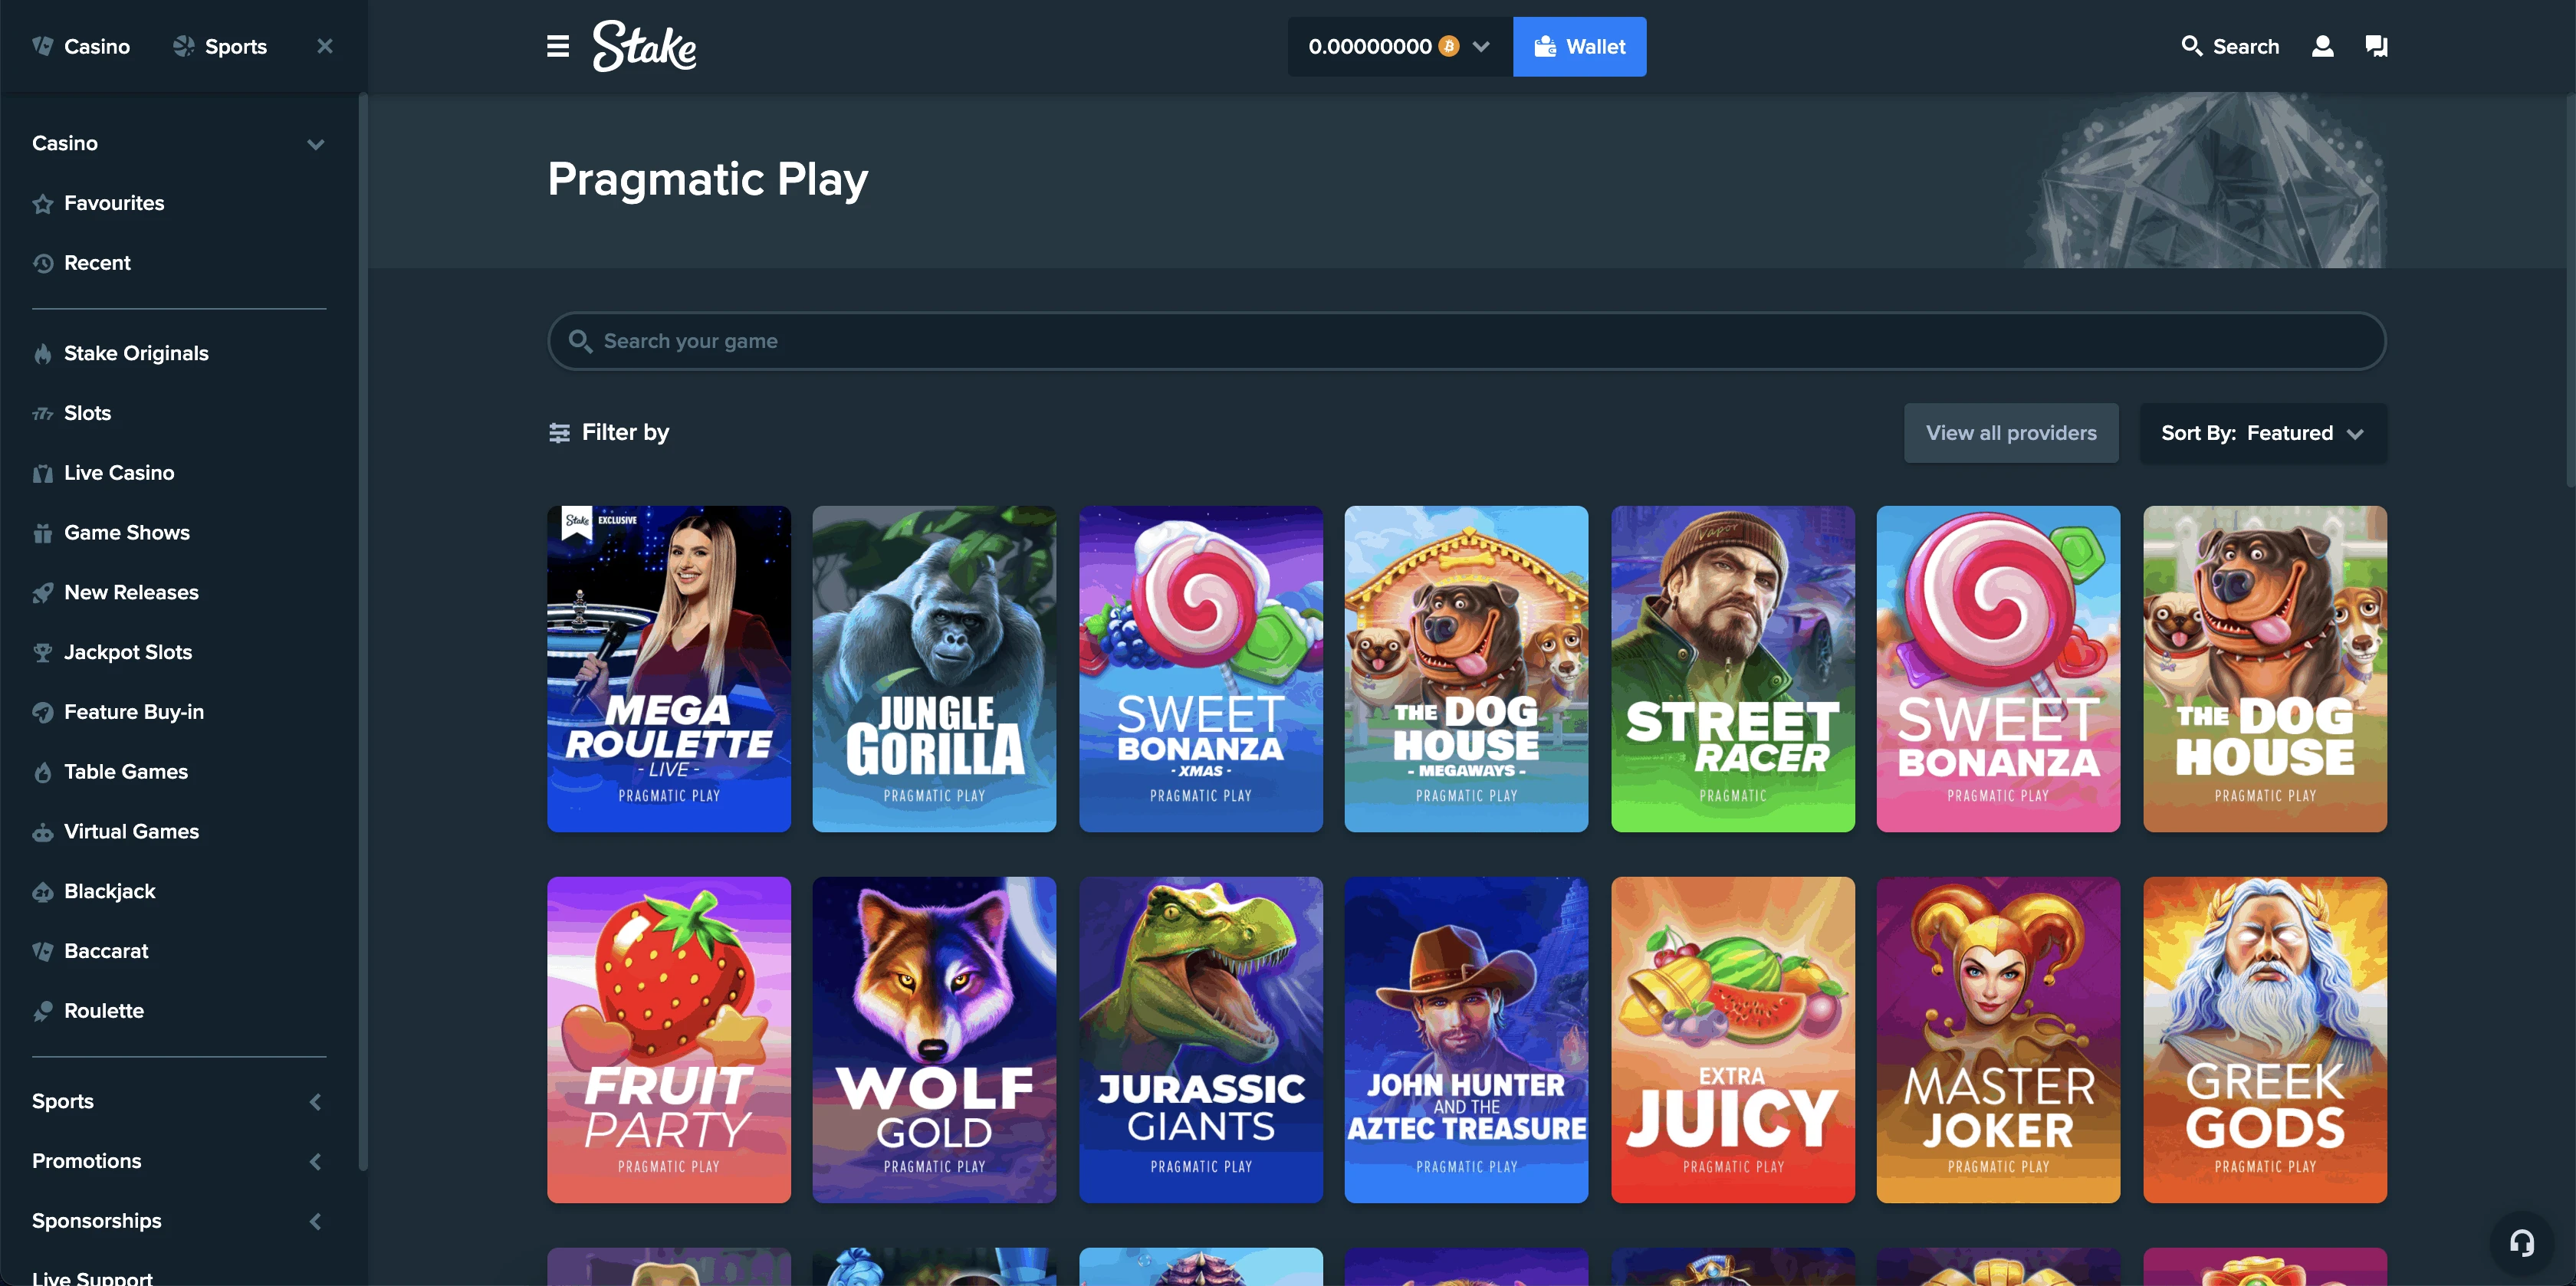 Stake gets exclusive with Pragmatic Play